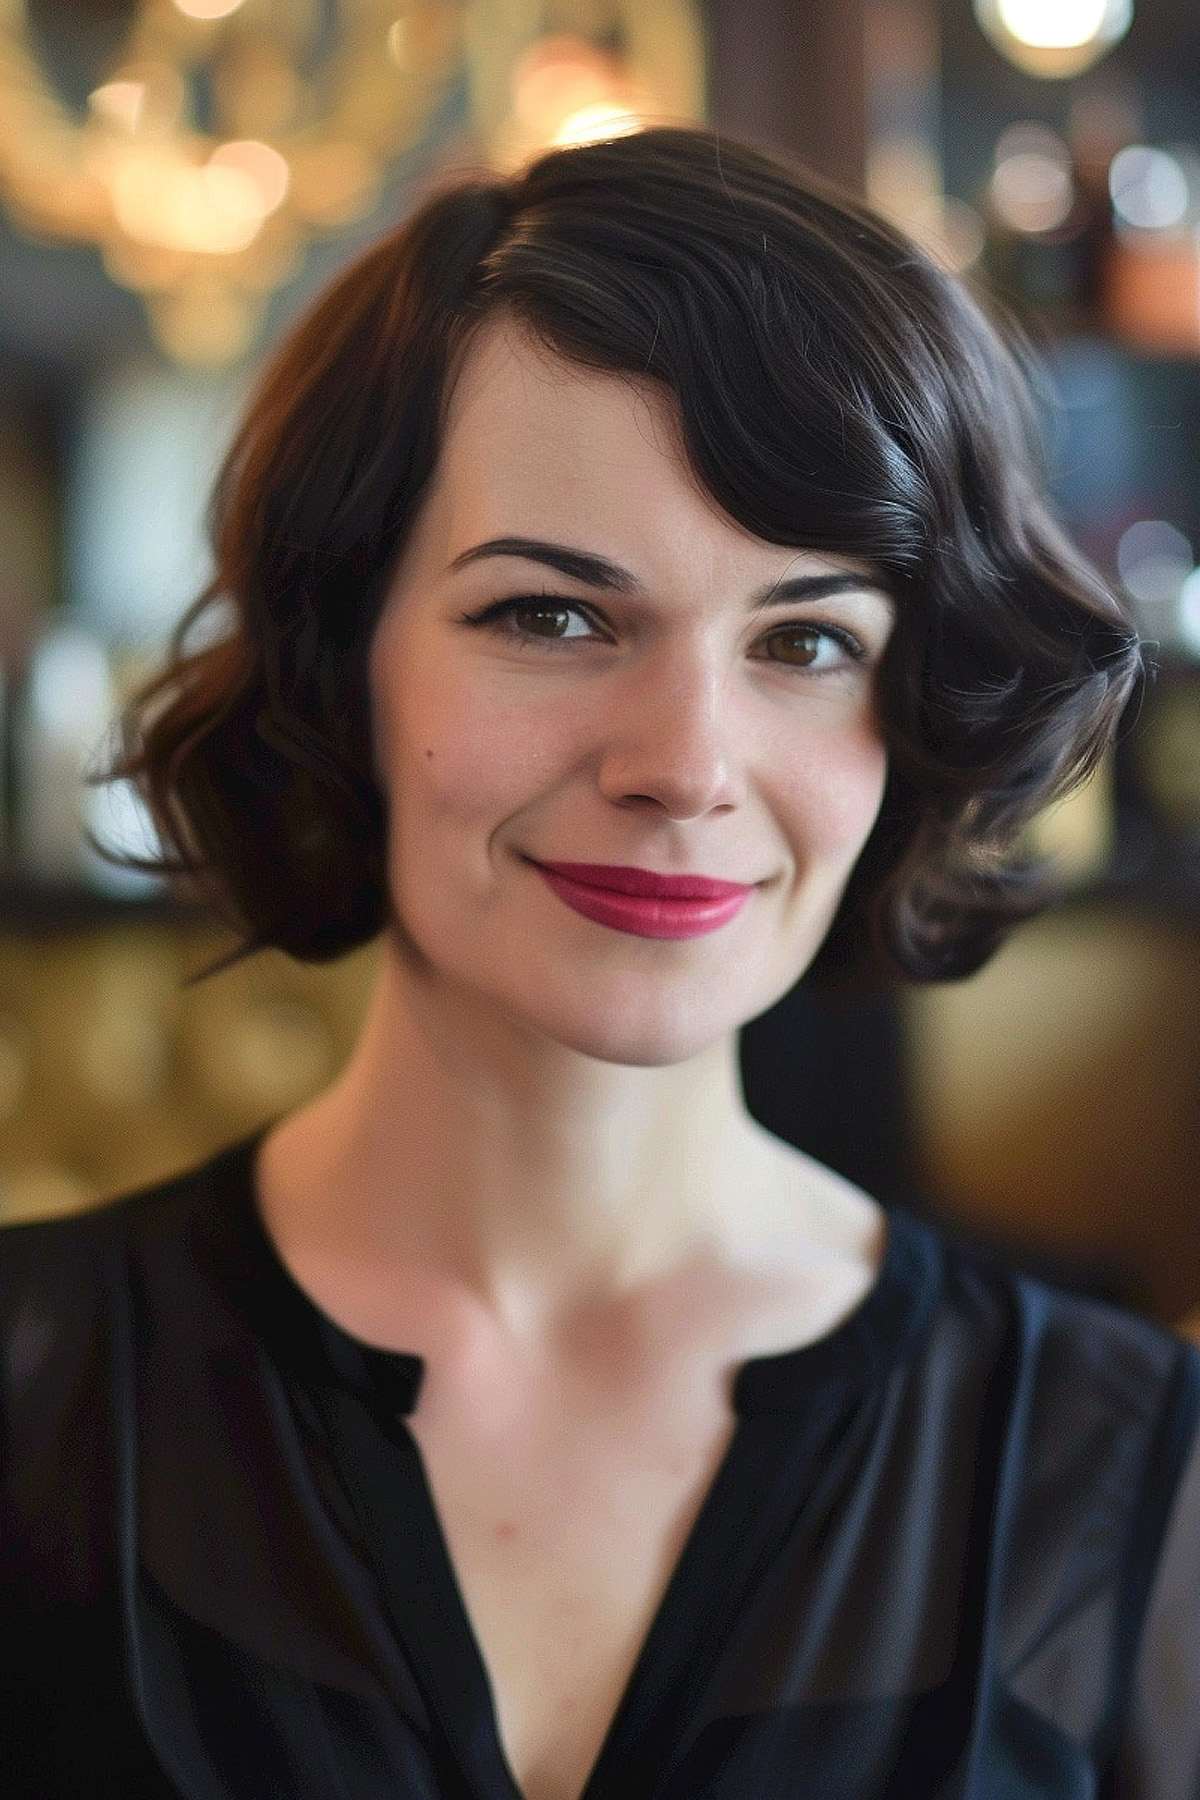 Chanel bob haircut with a deep side part and glossy, dark hair.